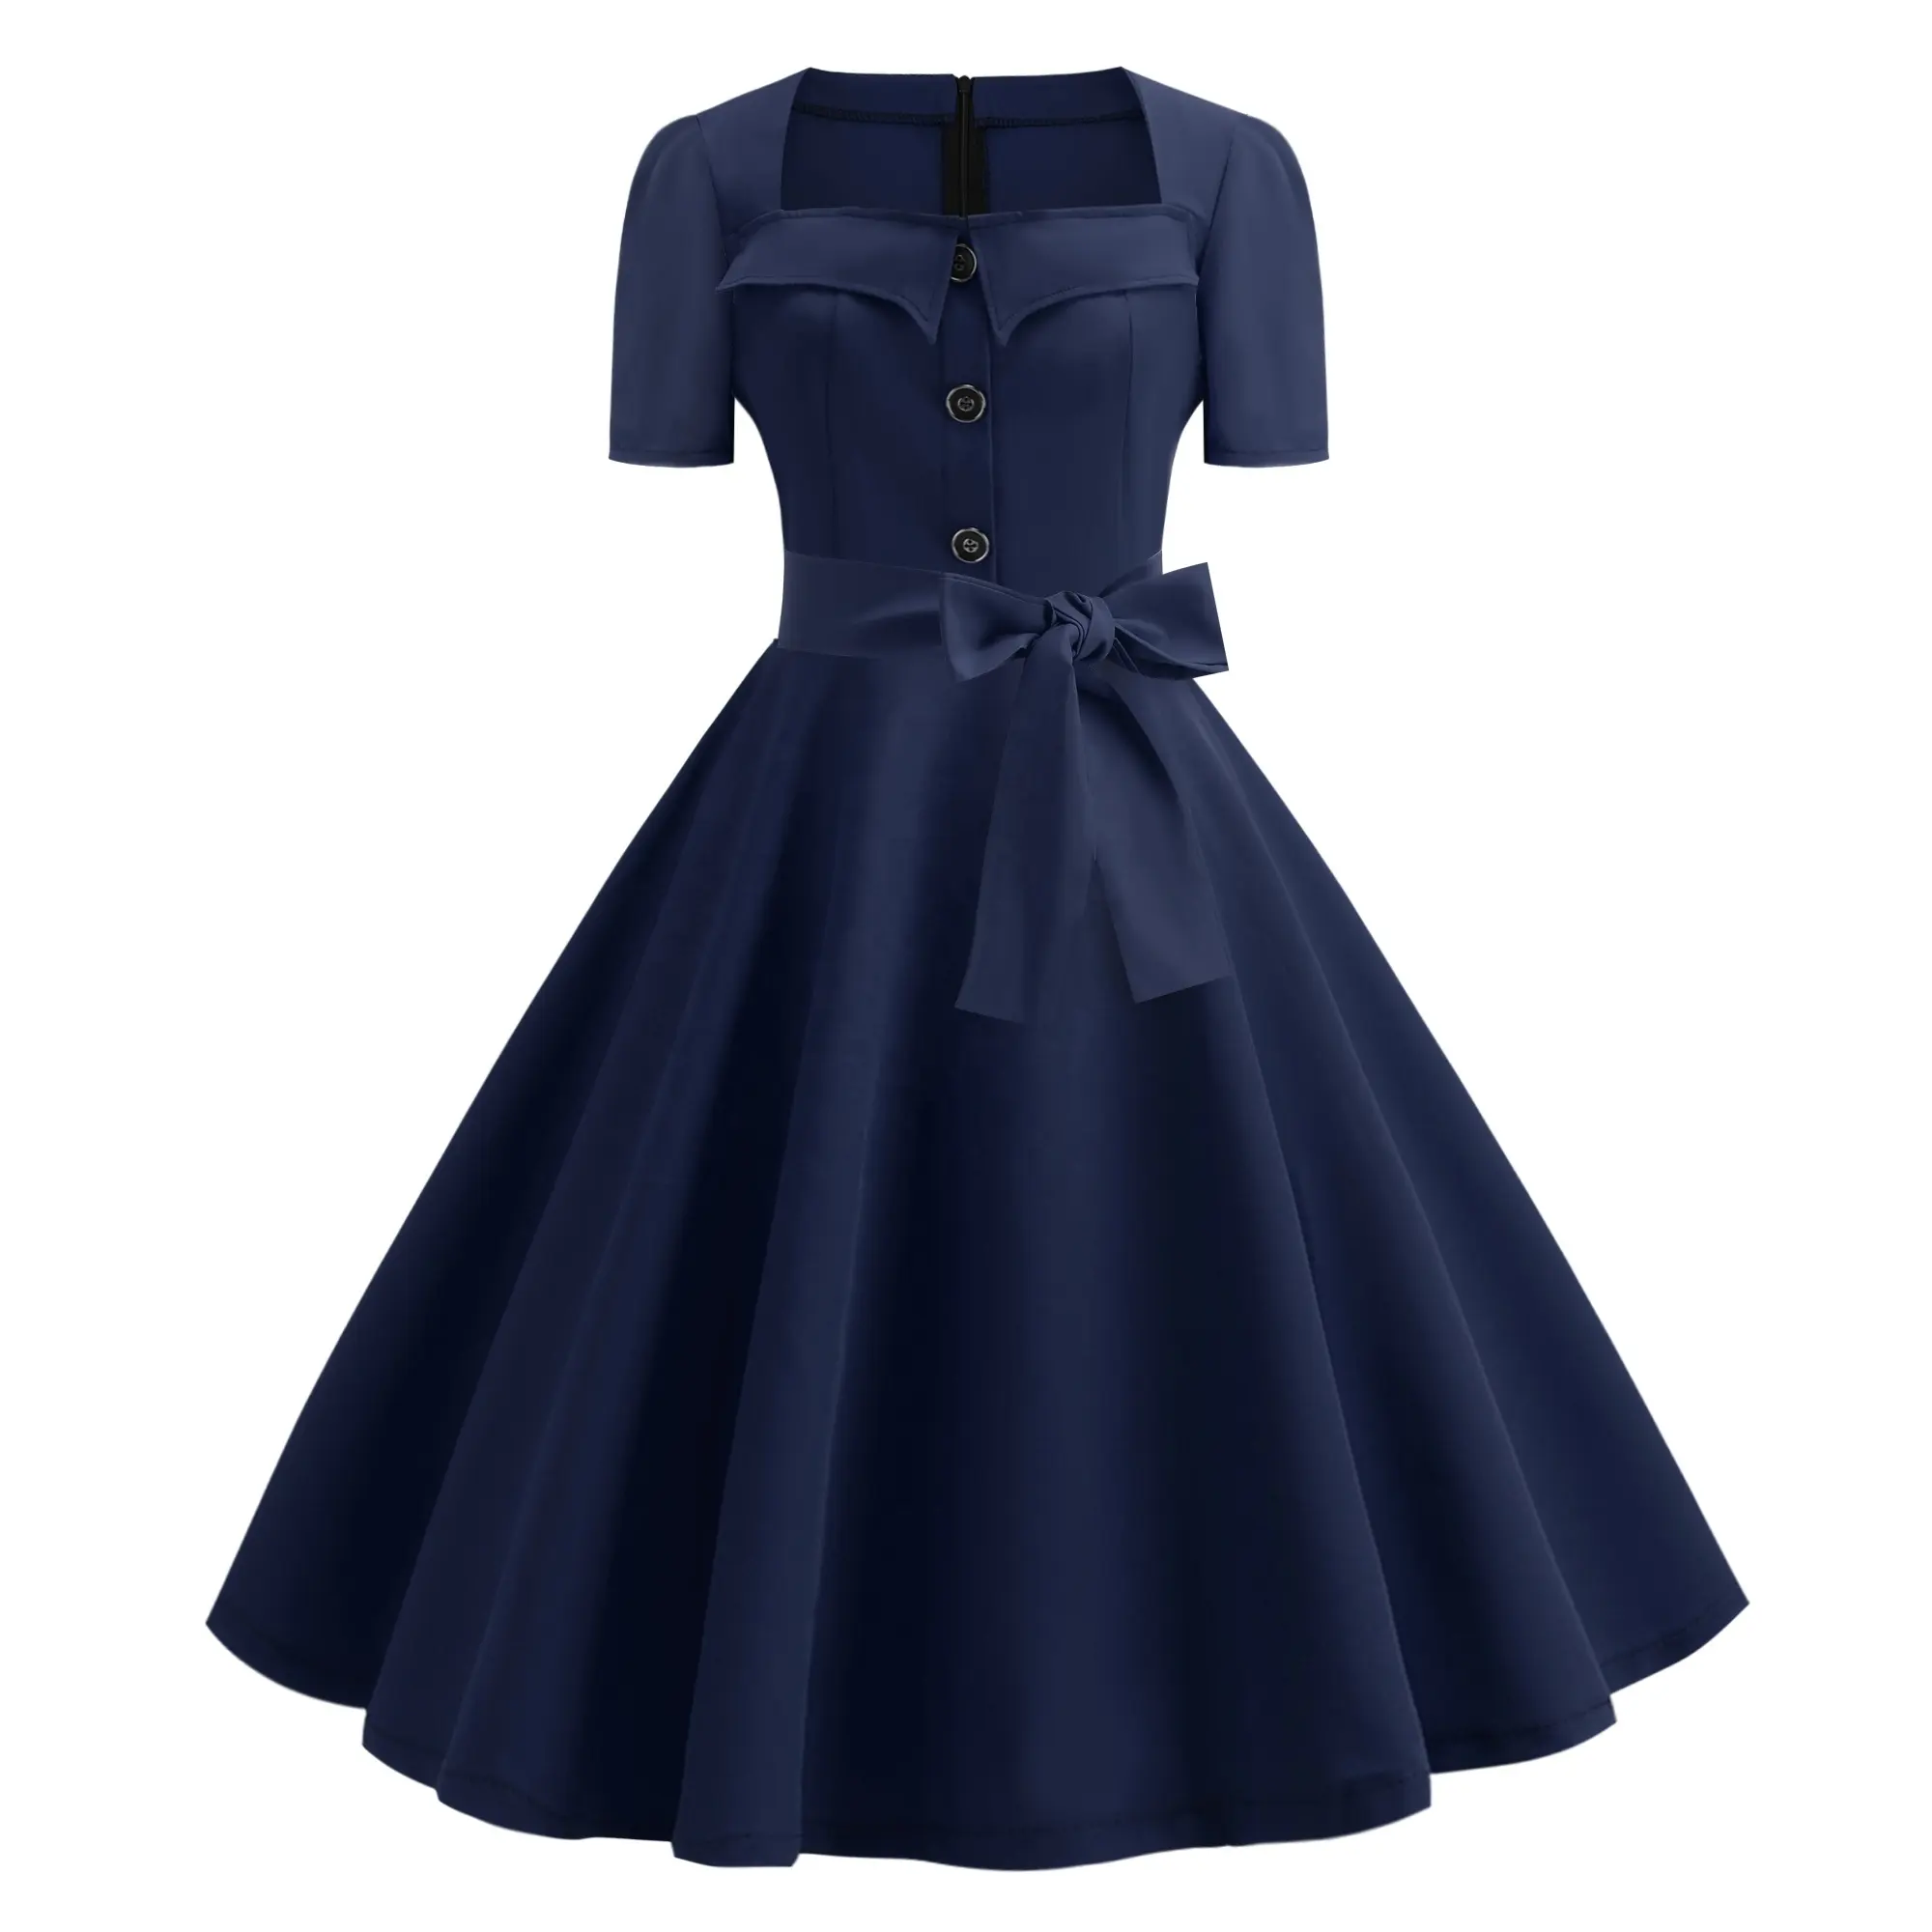 SP-W6002 Của Phụ Nữ Vuông Cổ Collared Tie Eo 40S 50S Vintage Dress